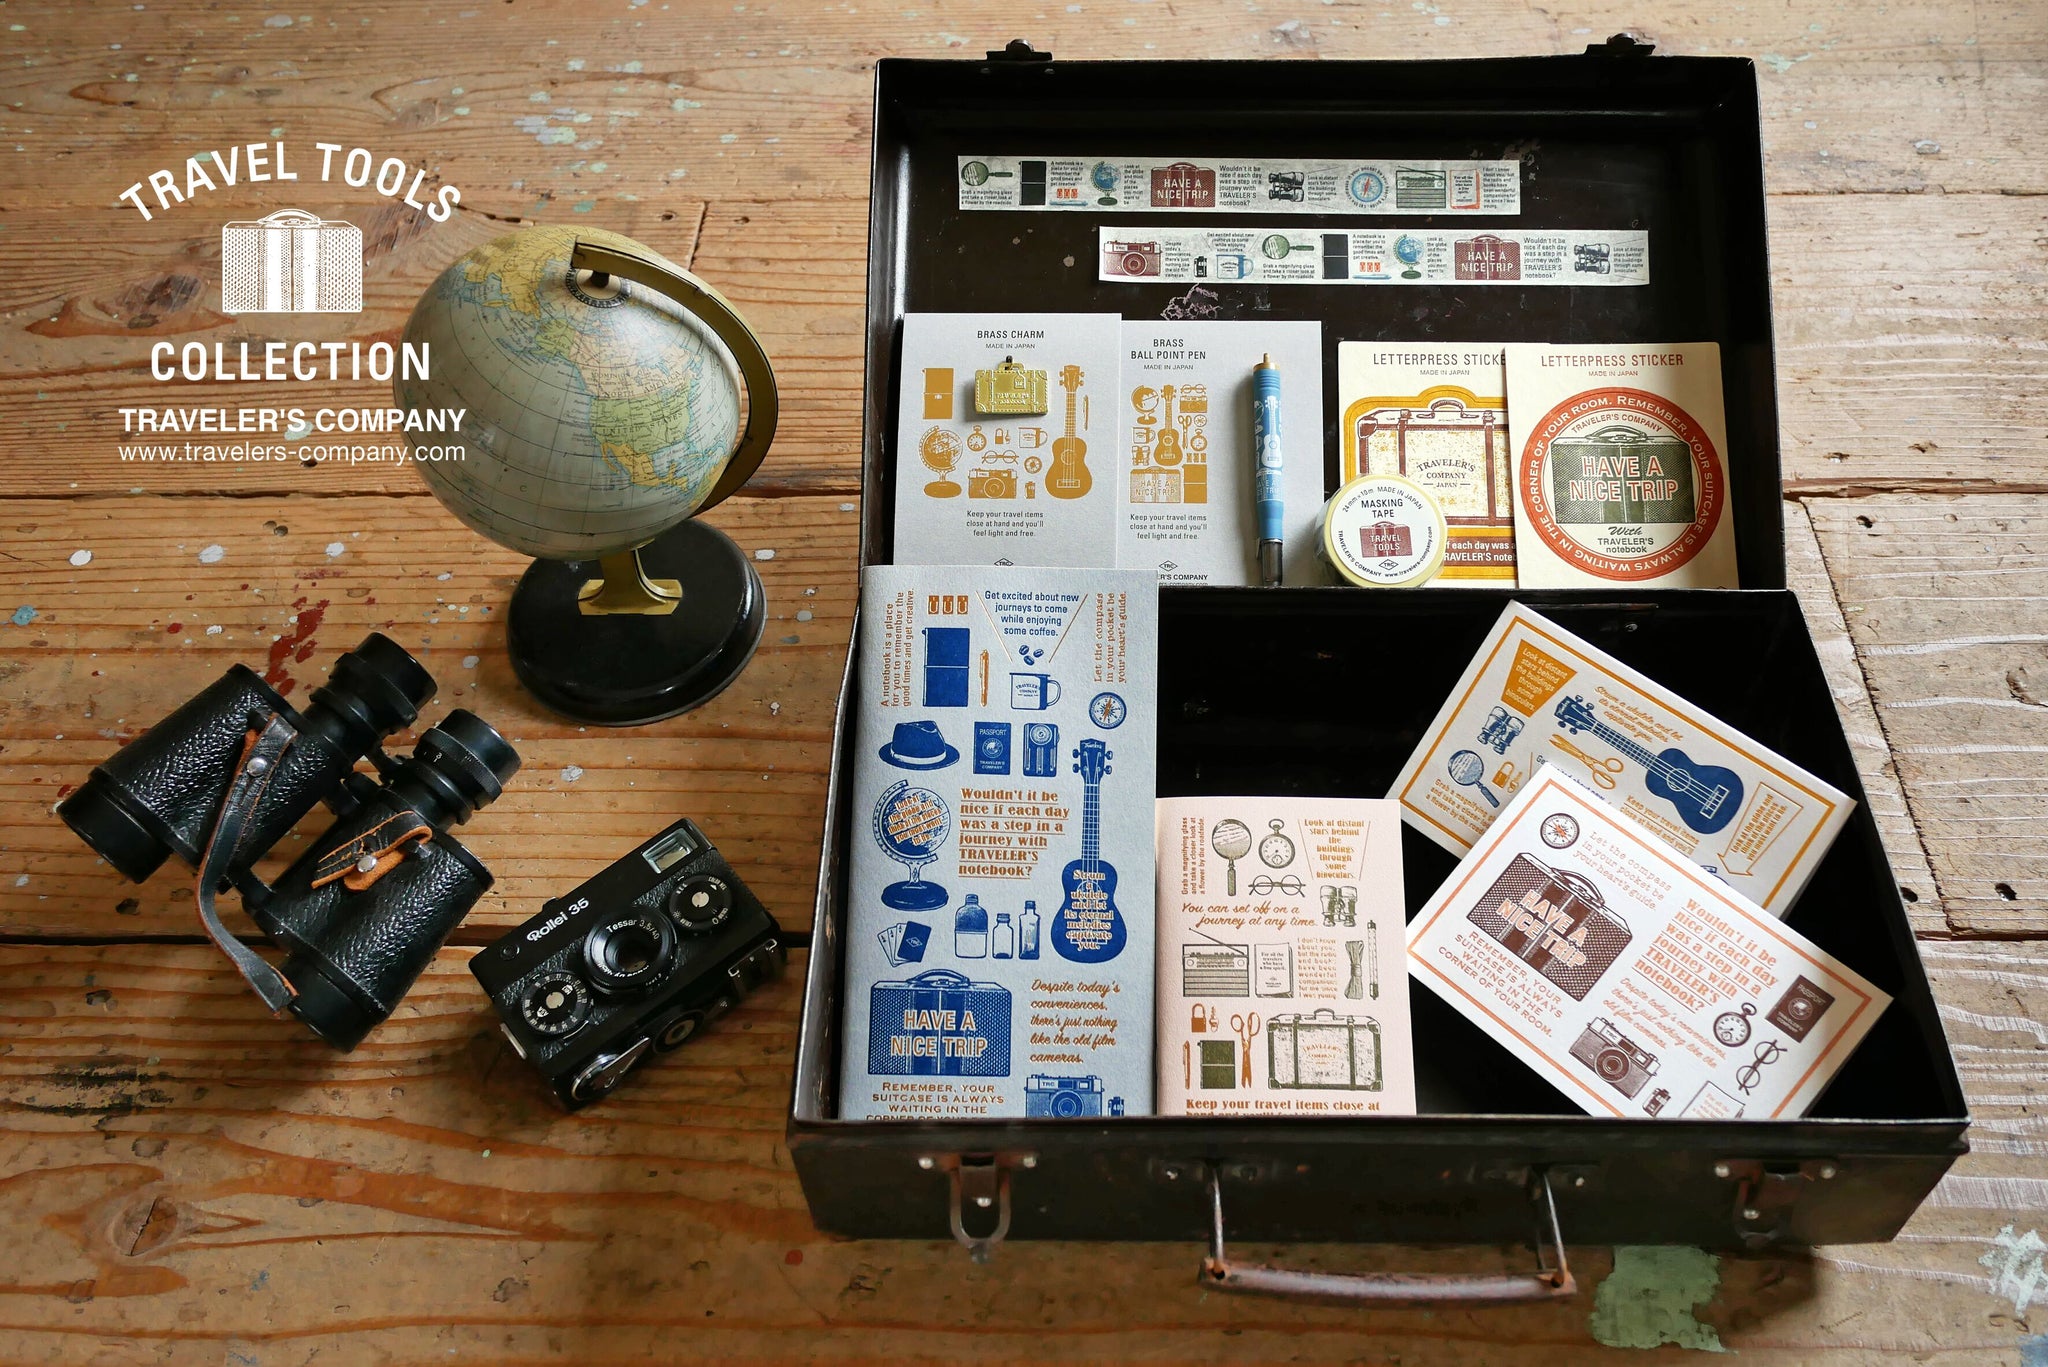 traveler's company ltd edition travel tools collection